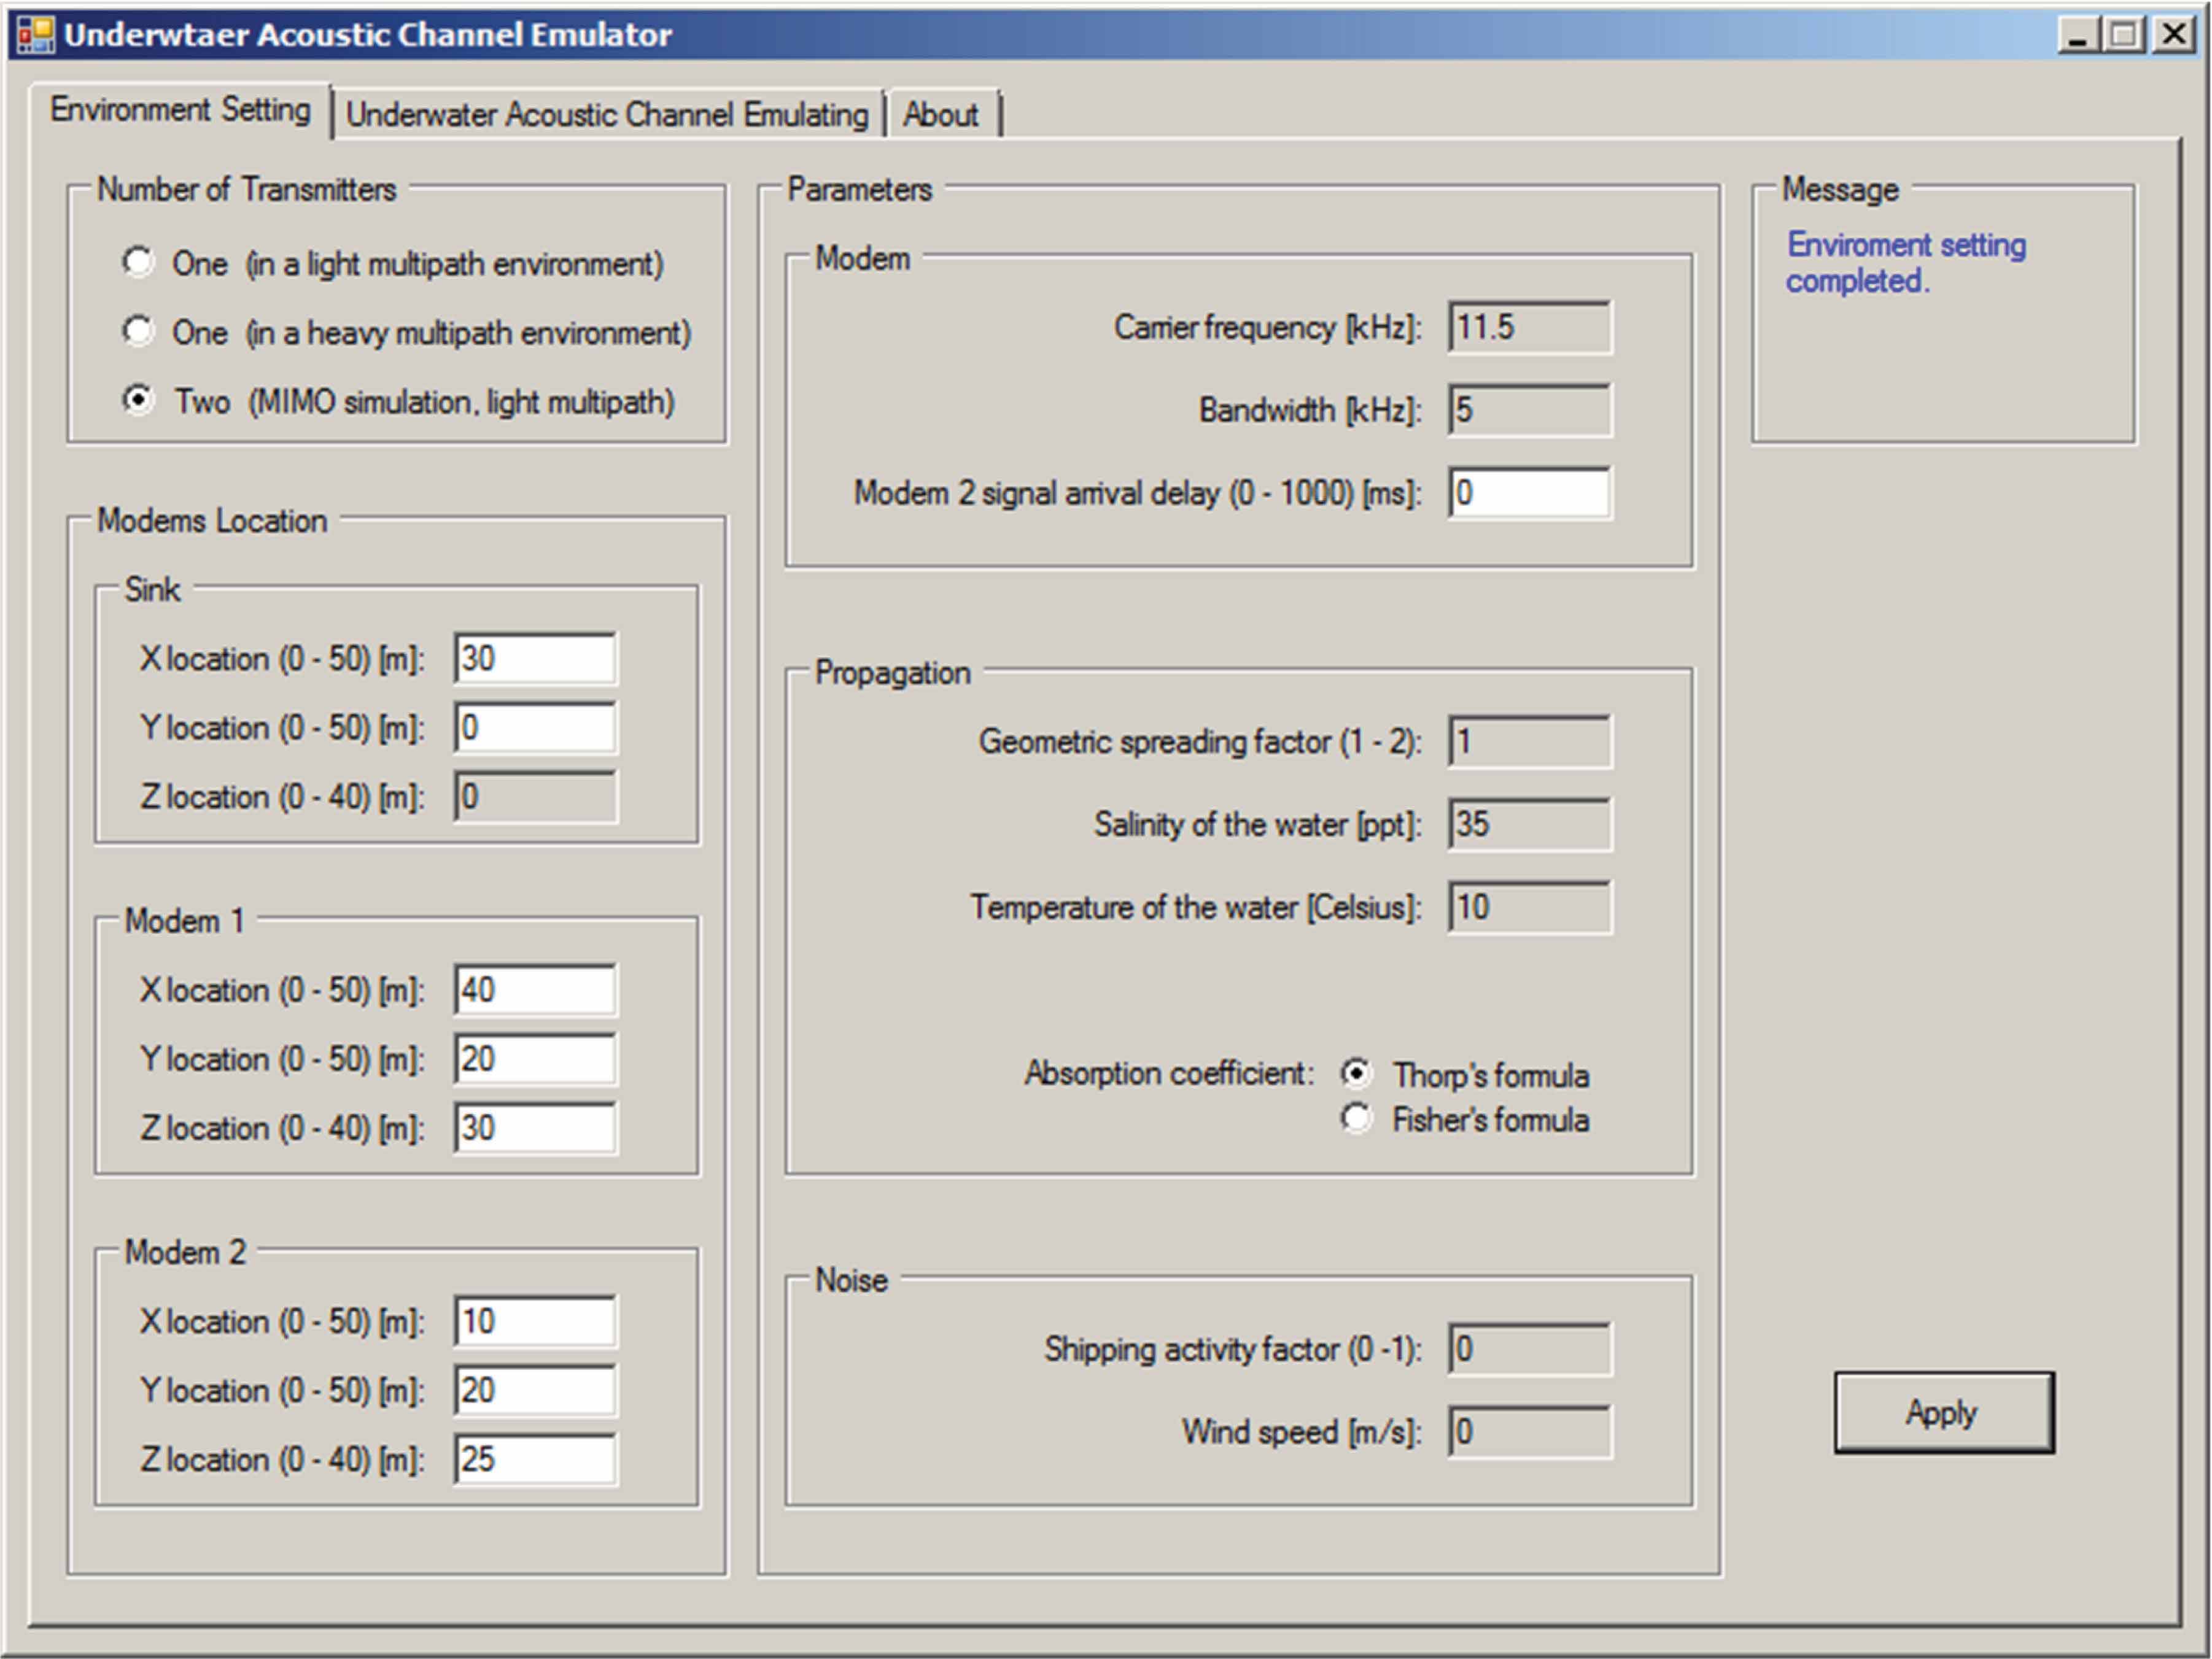 GUI for environment setting.